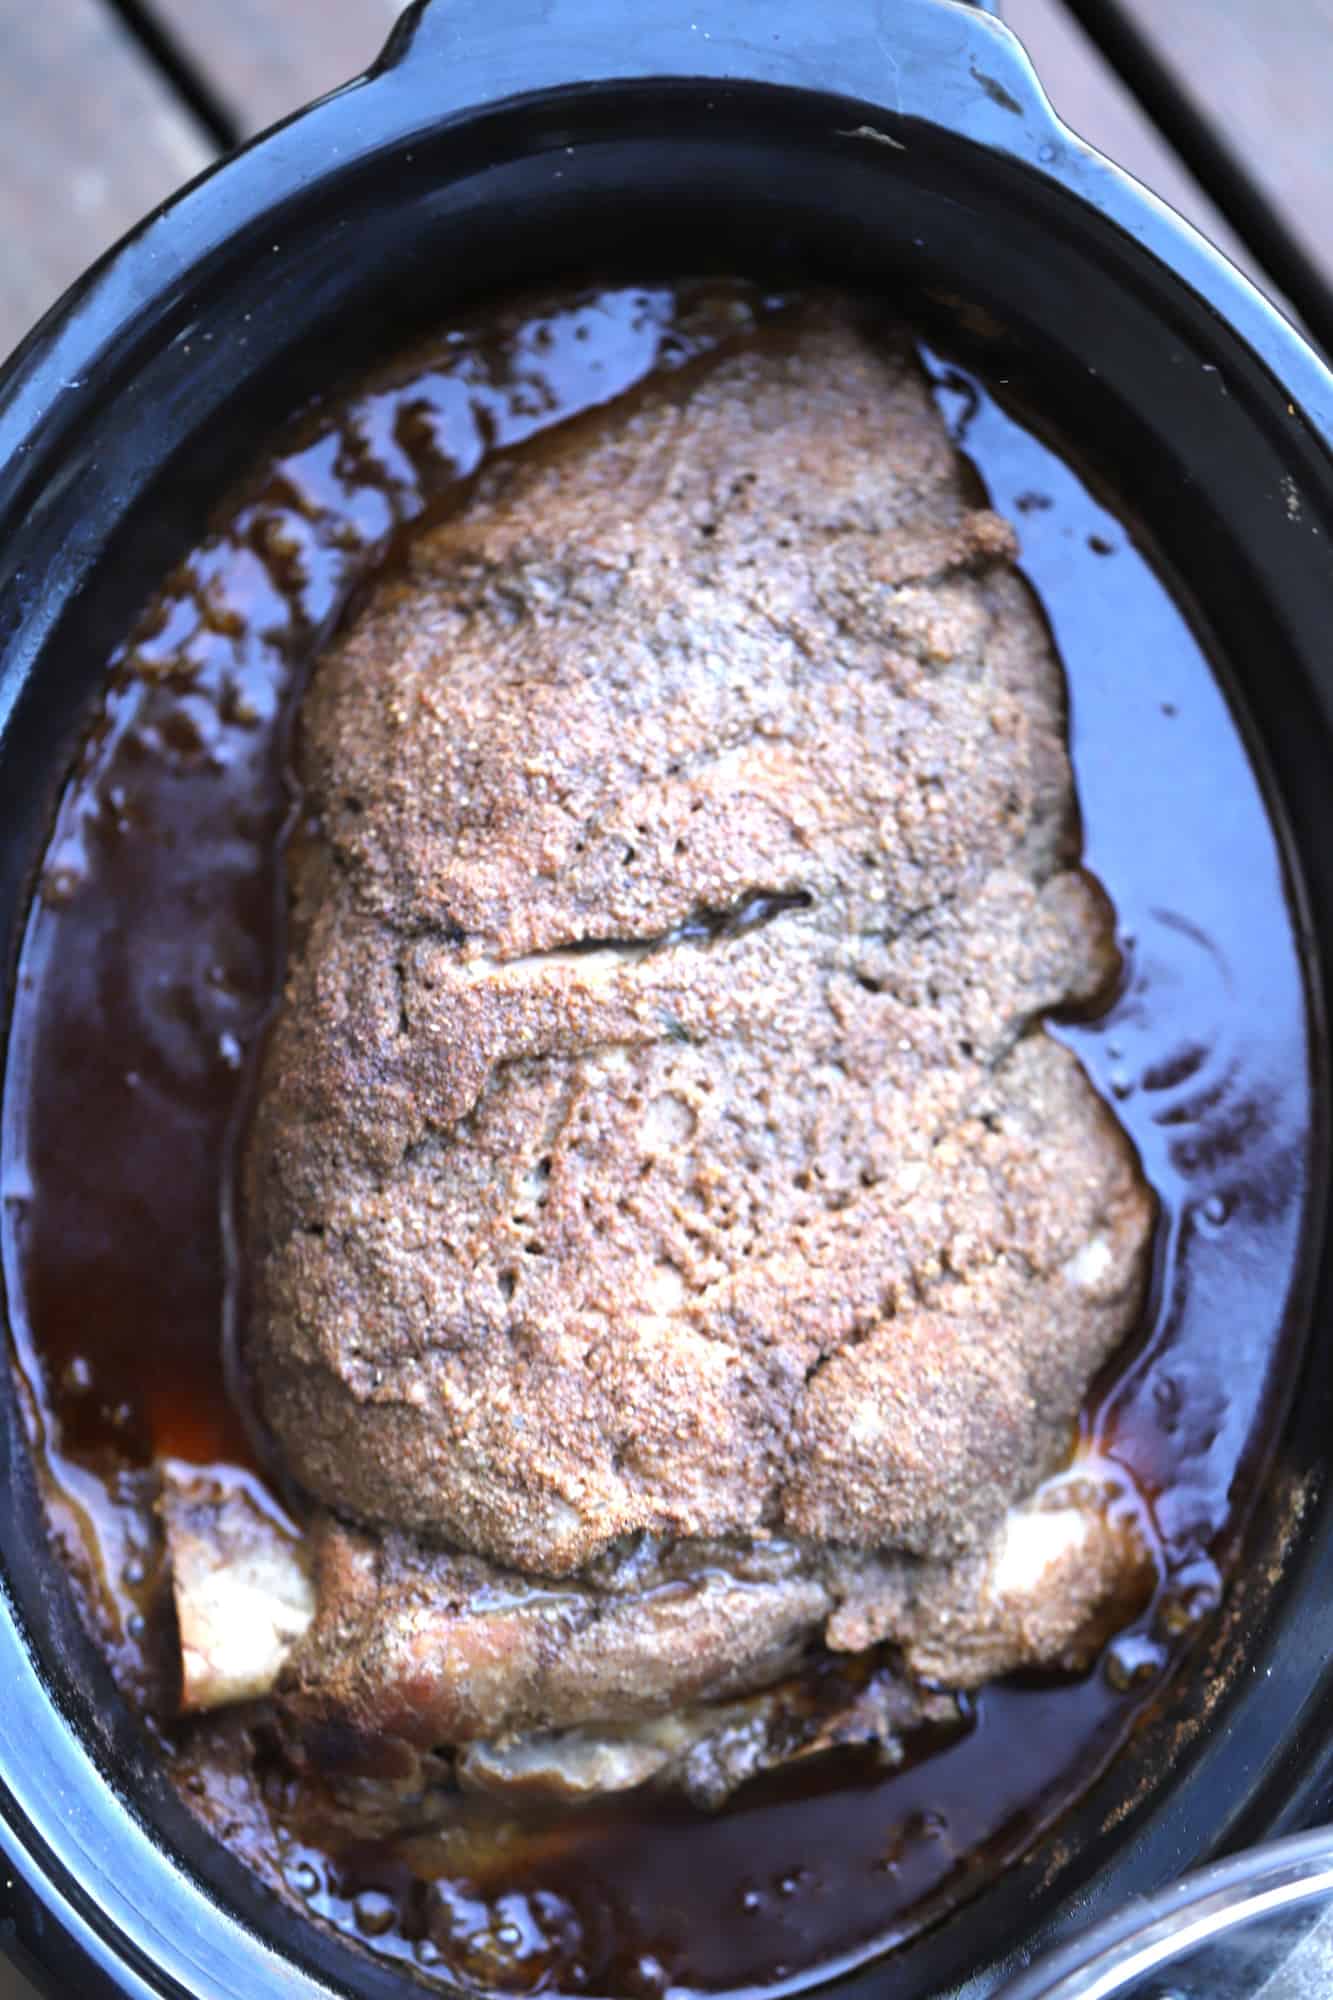 Bone-in pork shoulder in a slow cooker ready to shred into this pulled pork recipe. pork picnic roast recipe, crock pot picnic roast. pork picnic roast